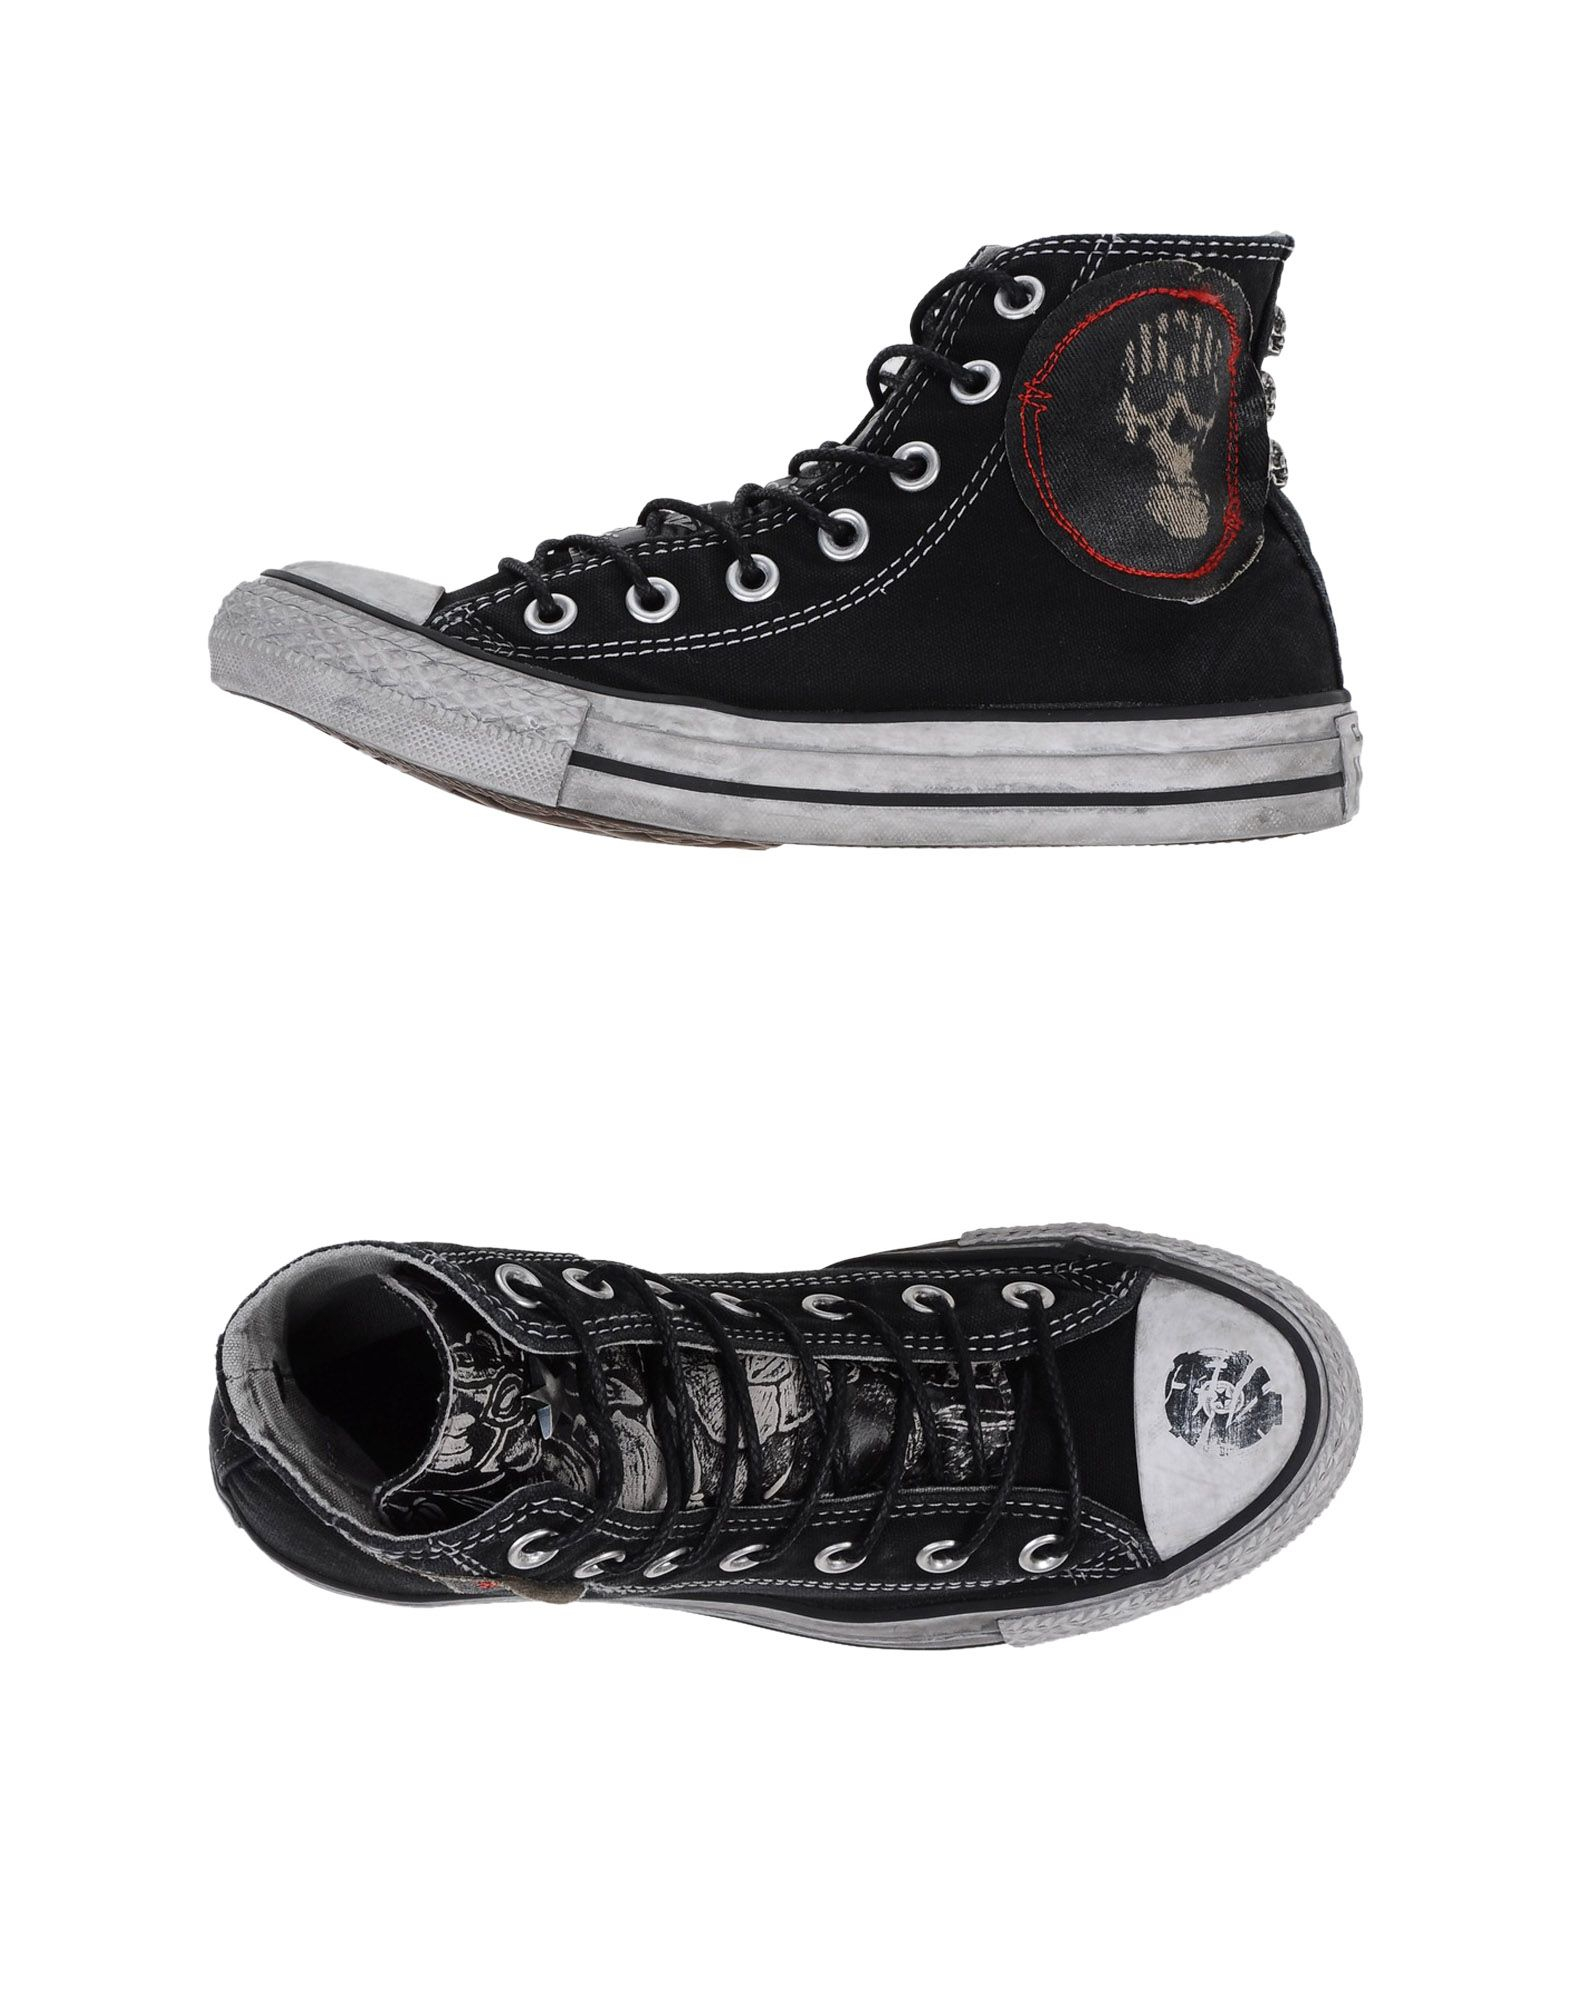 Converse High-tops & Trainers in Black for Men - Lyst